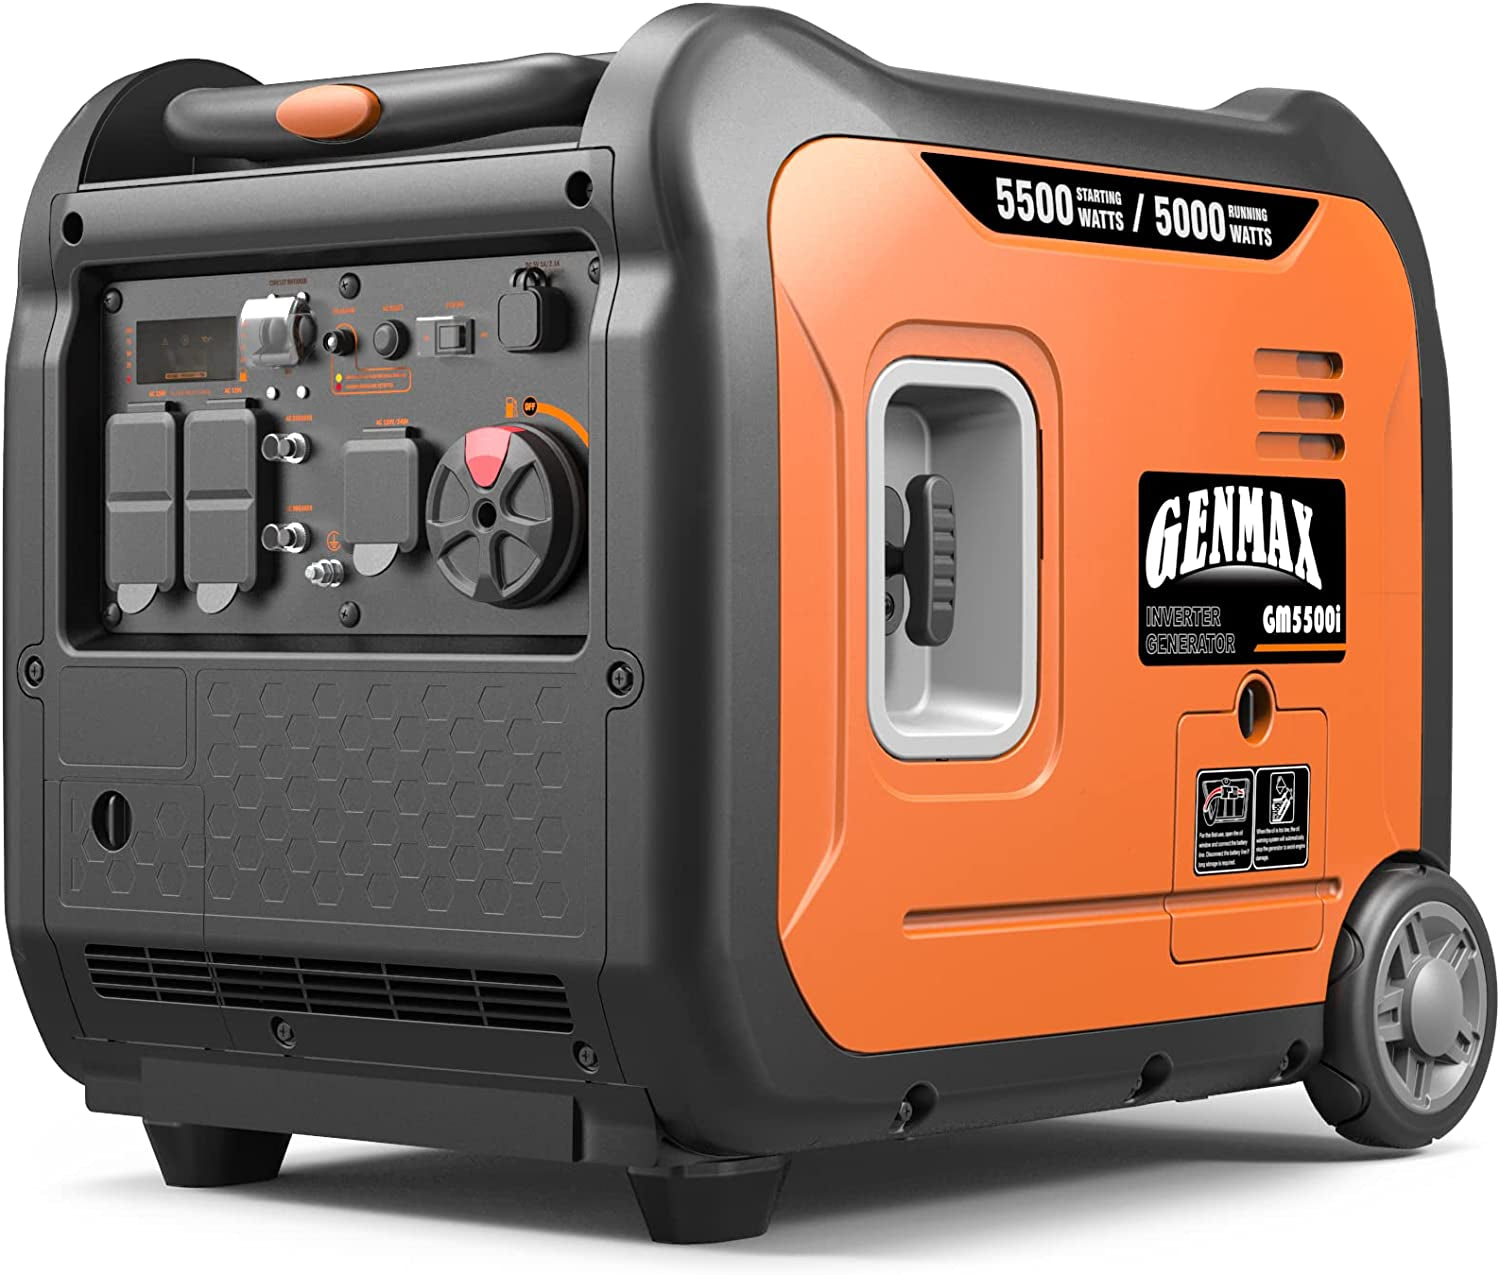 Portable Inverter Generator，5500W Ultra-Quiet Gas Engine, EPA Compliant, Eco-Mode Feature, Ultra Lightweight for Backup Home Use & Camping (Gm5500I)